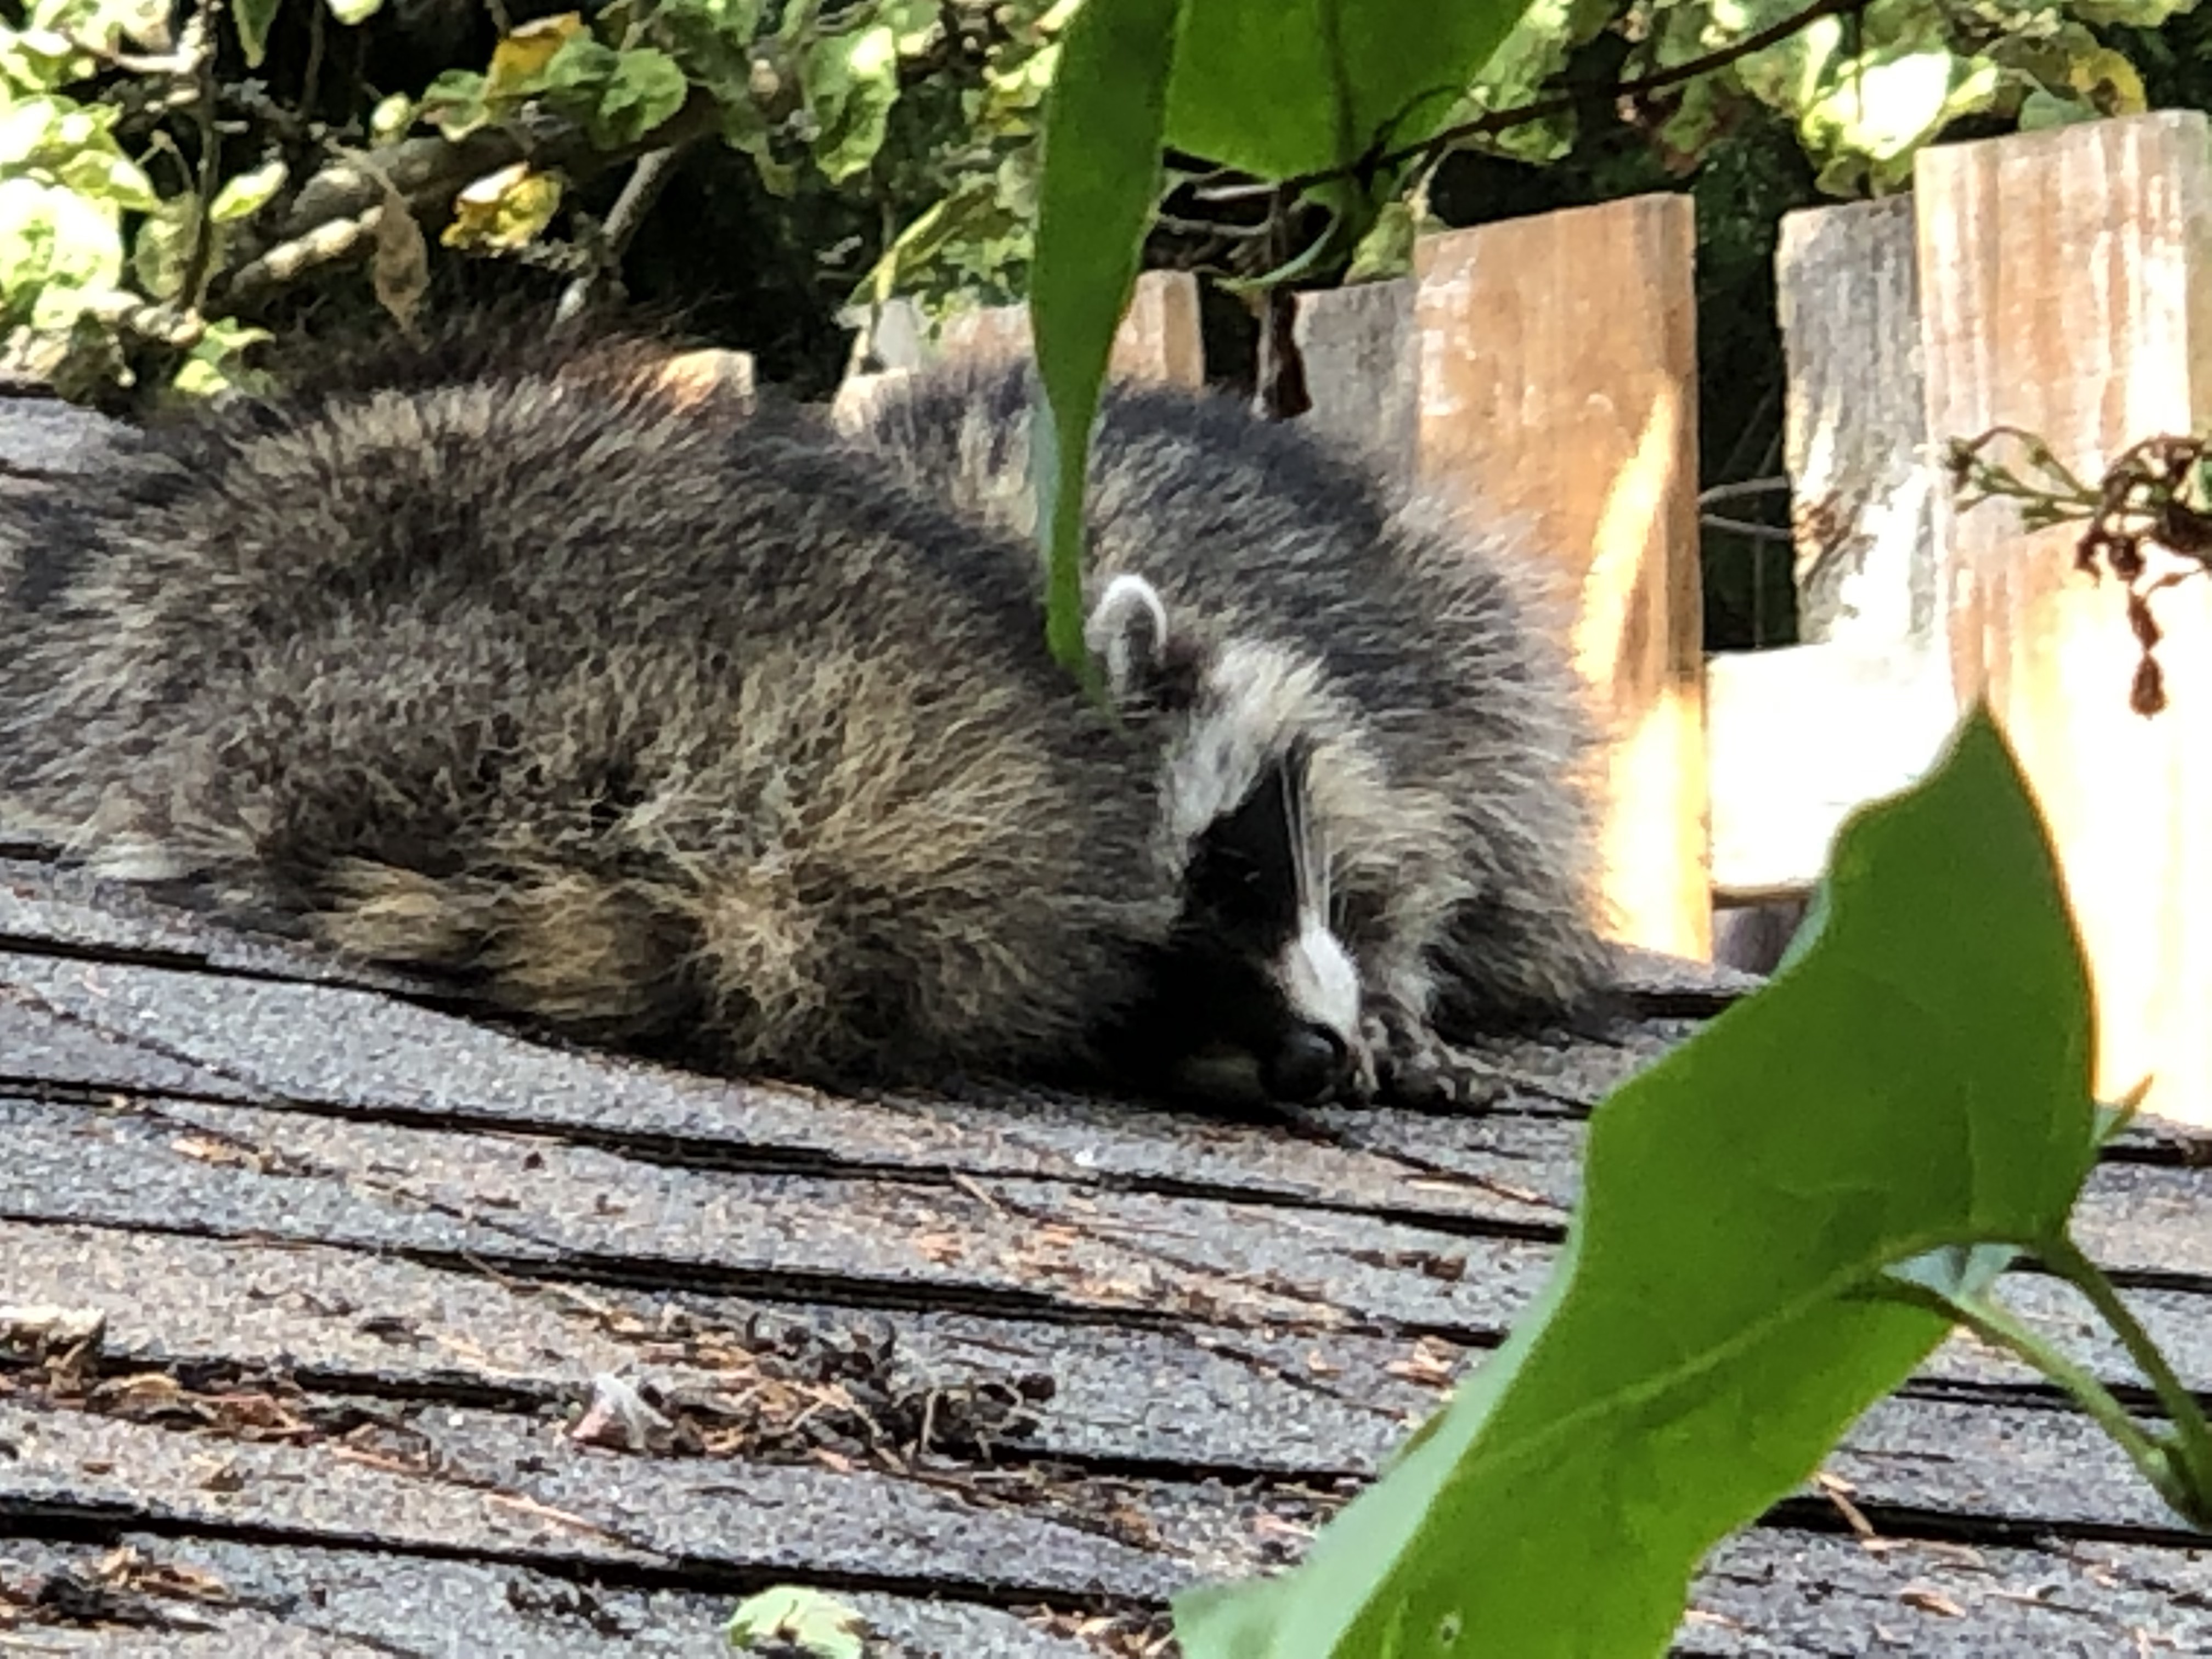 Two raccoons curled up together and sleeping on the roof of a garage.